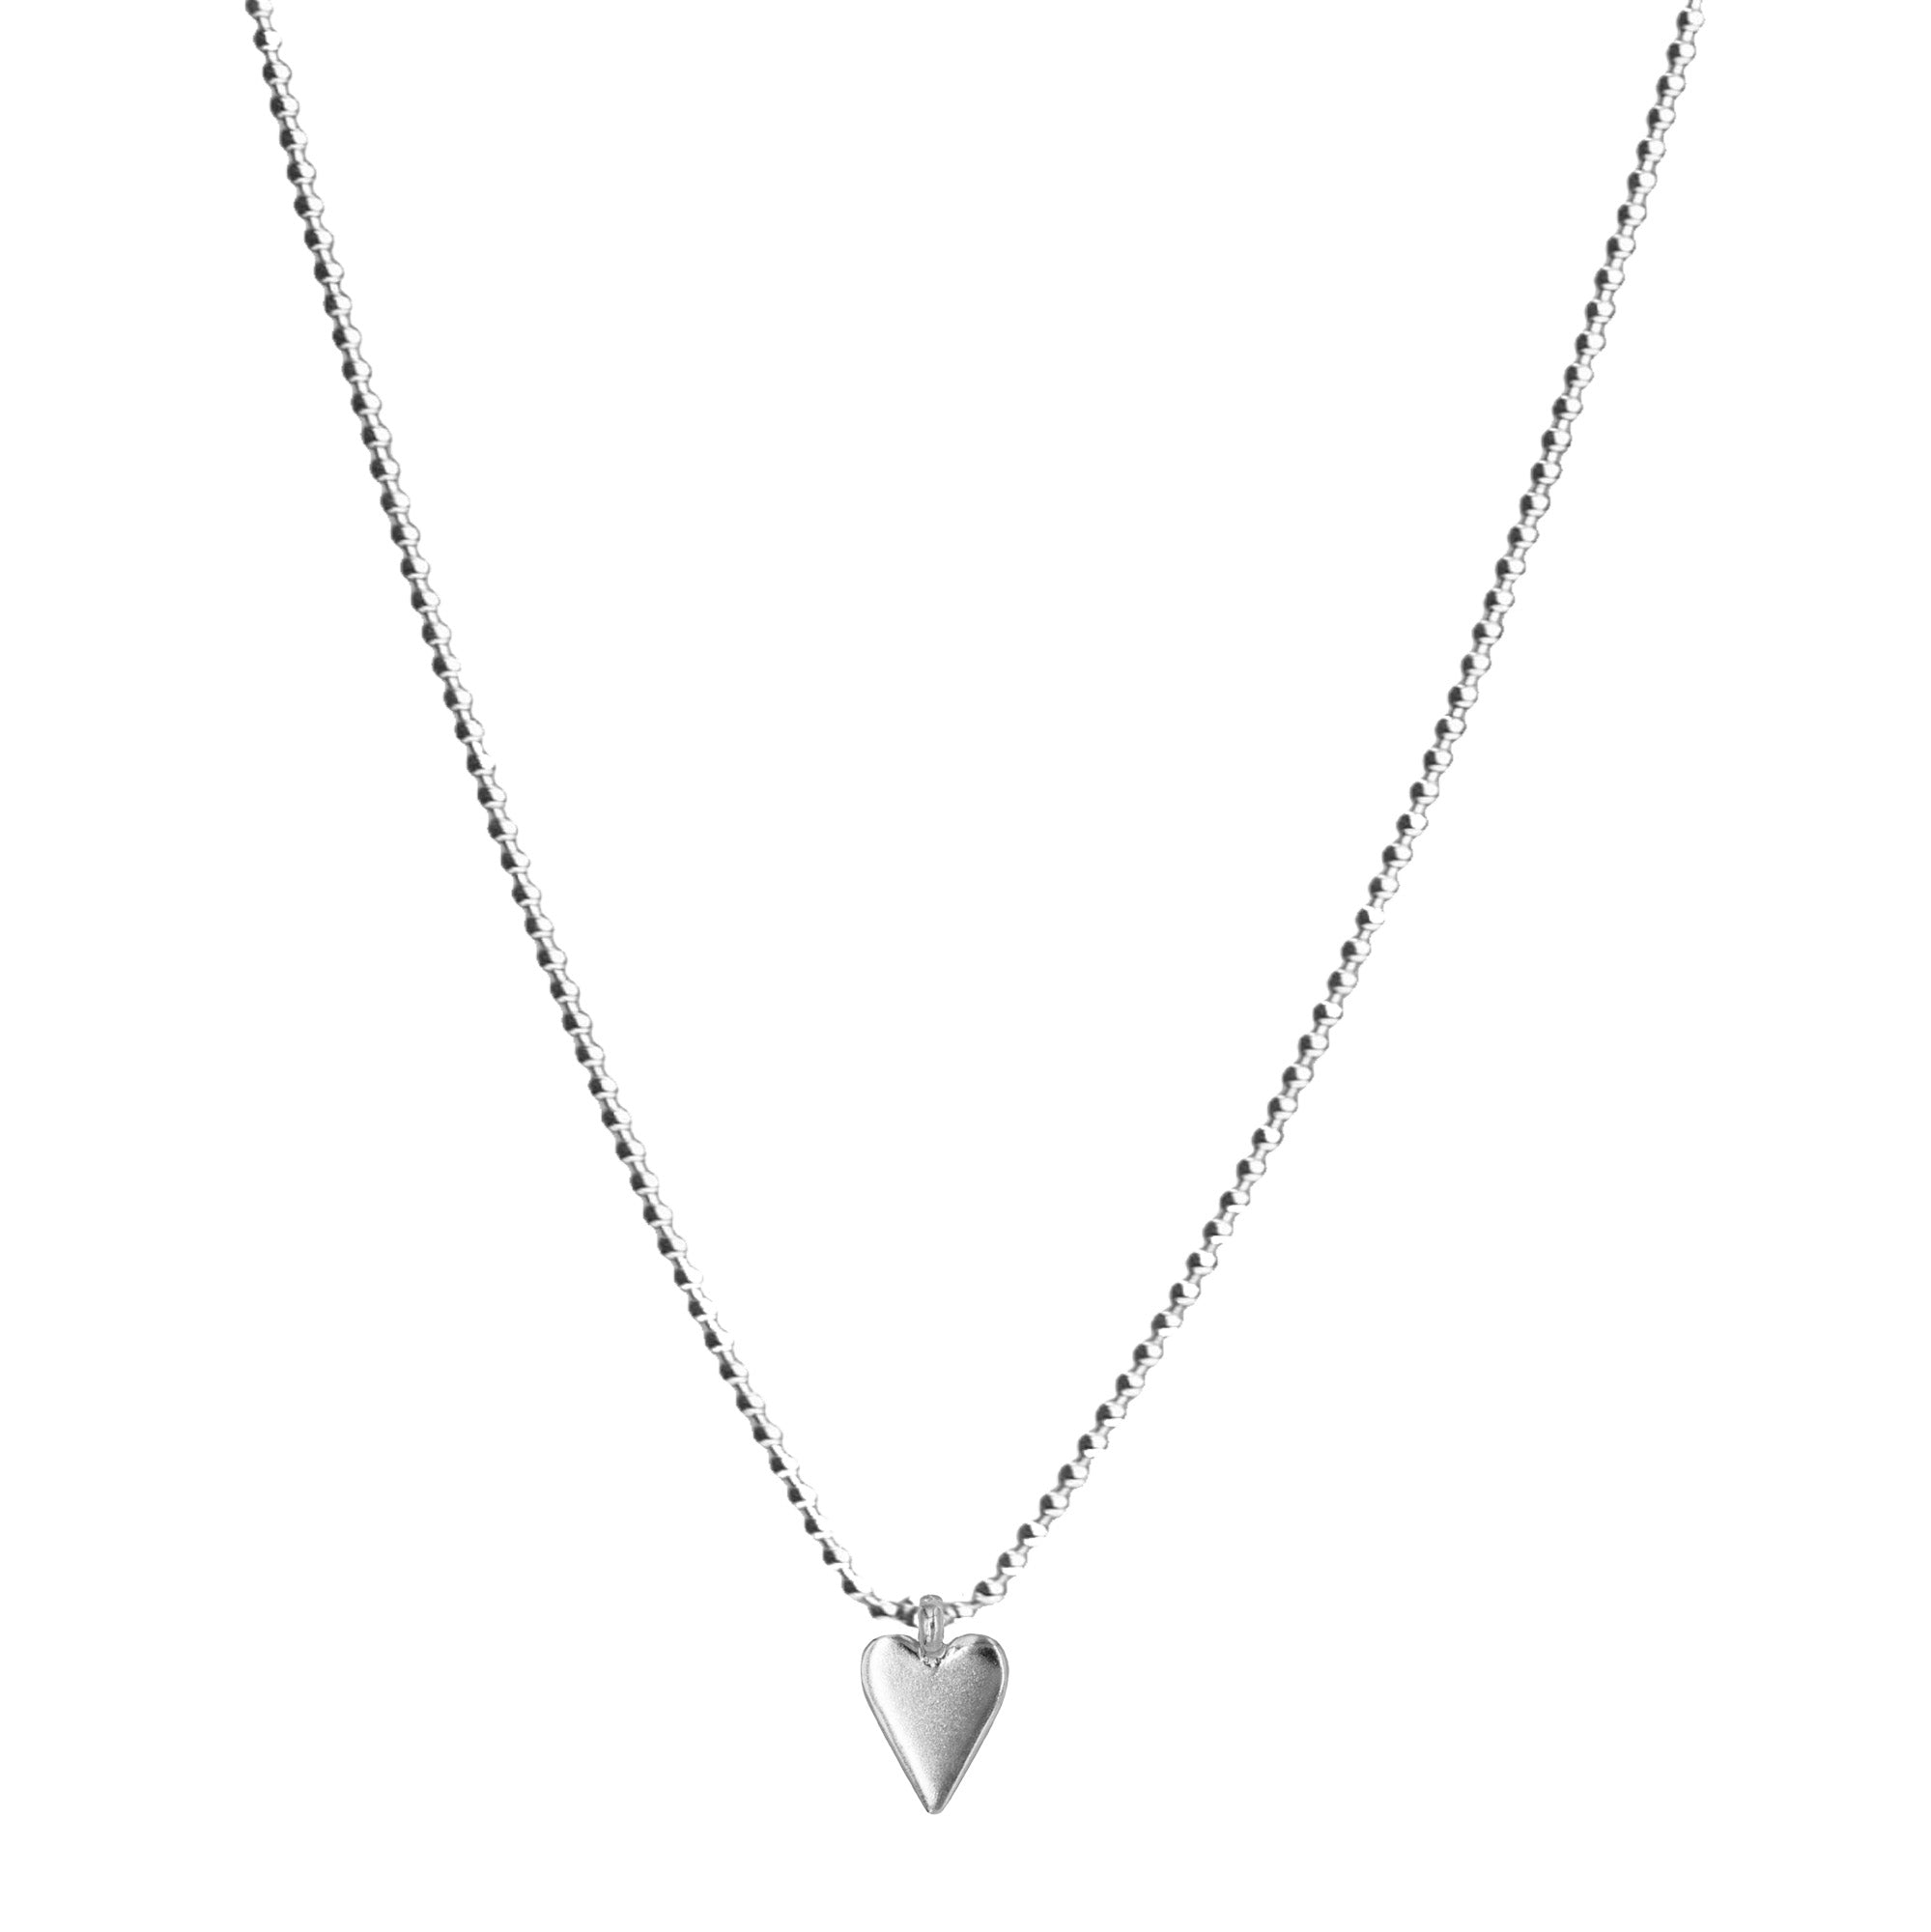 Belle & Bee Sterling Silver Midi Heart Ball chain necklace